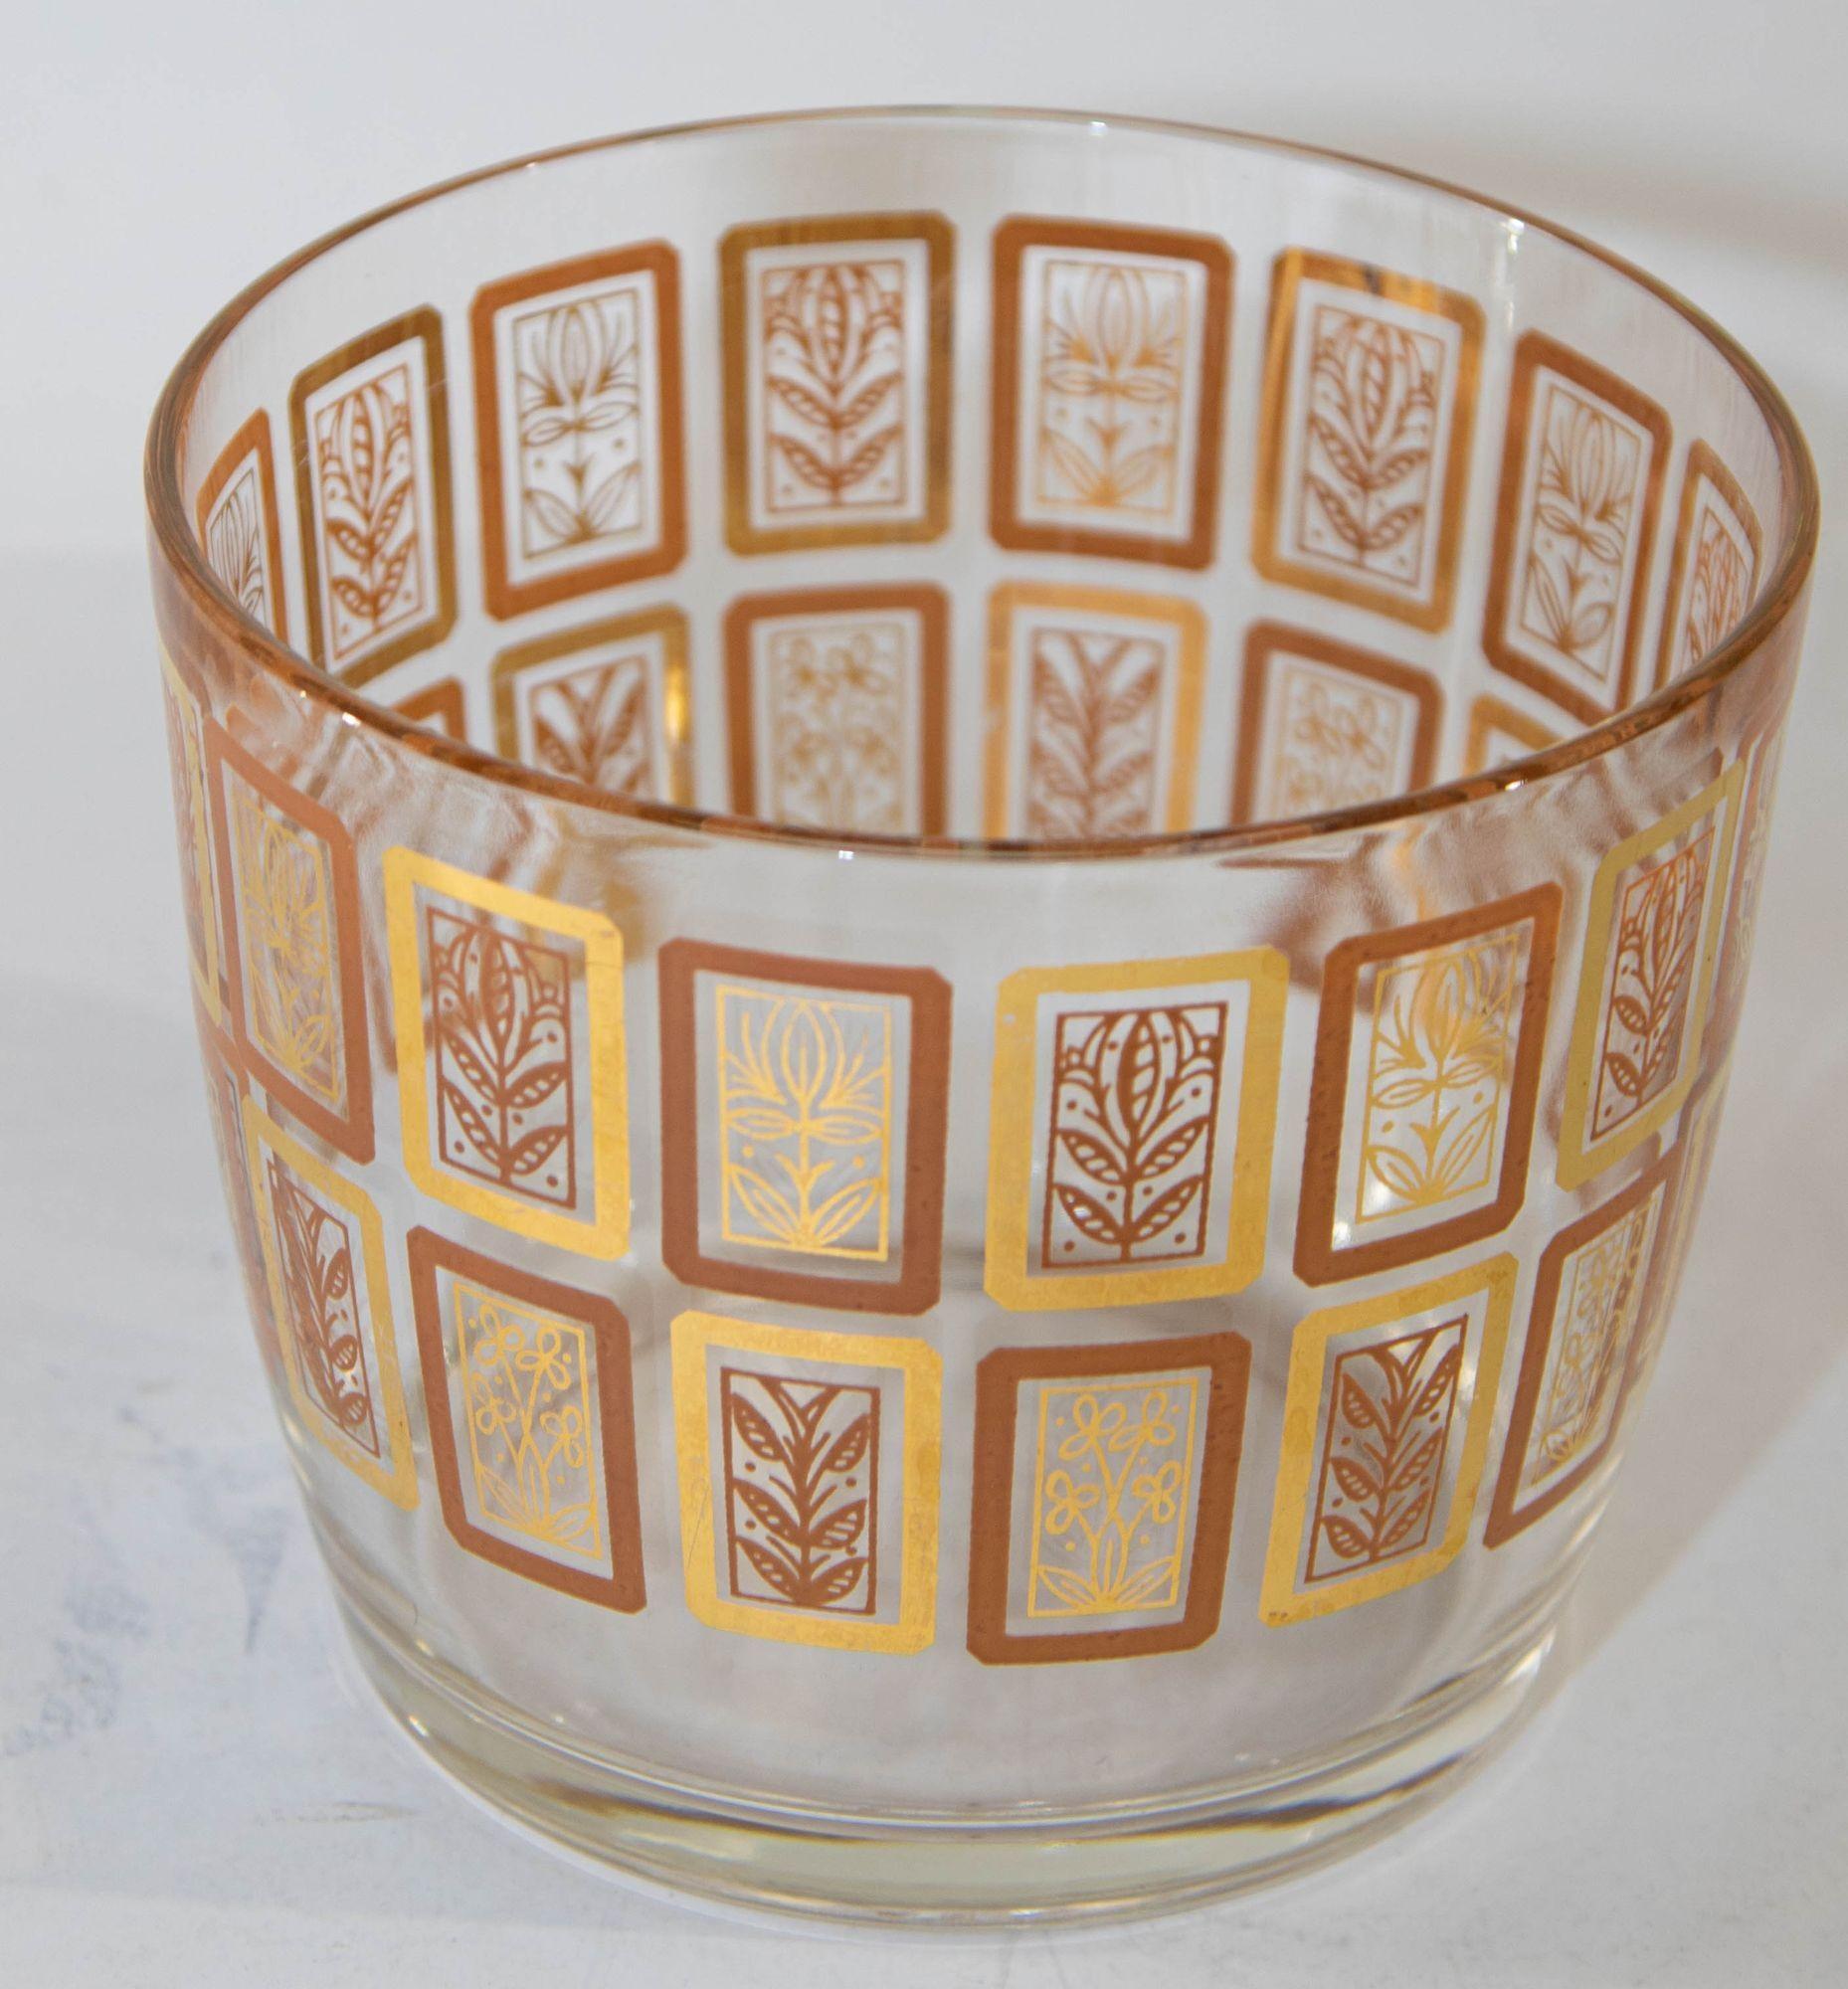 Vintage Hazel Atlas LOTUS Ice Bowl Bucket Clear Glass with Gold and Pink Leaf Design Mid Century Modern.
This fun mid century Lotus Autumnal vintage circular glass ice bucket features a floral pattern design in autumnal colors of coral, light brown